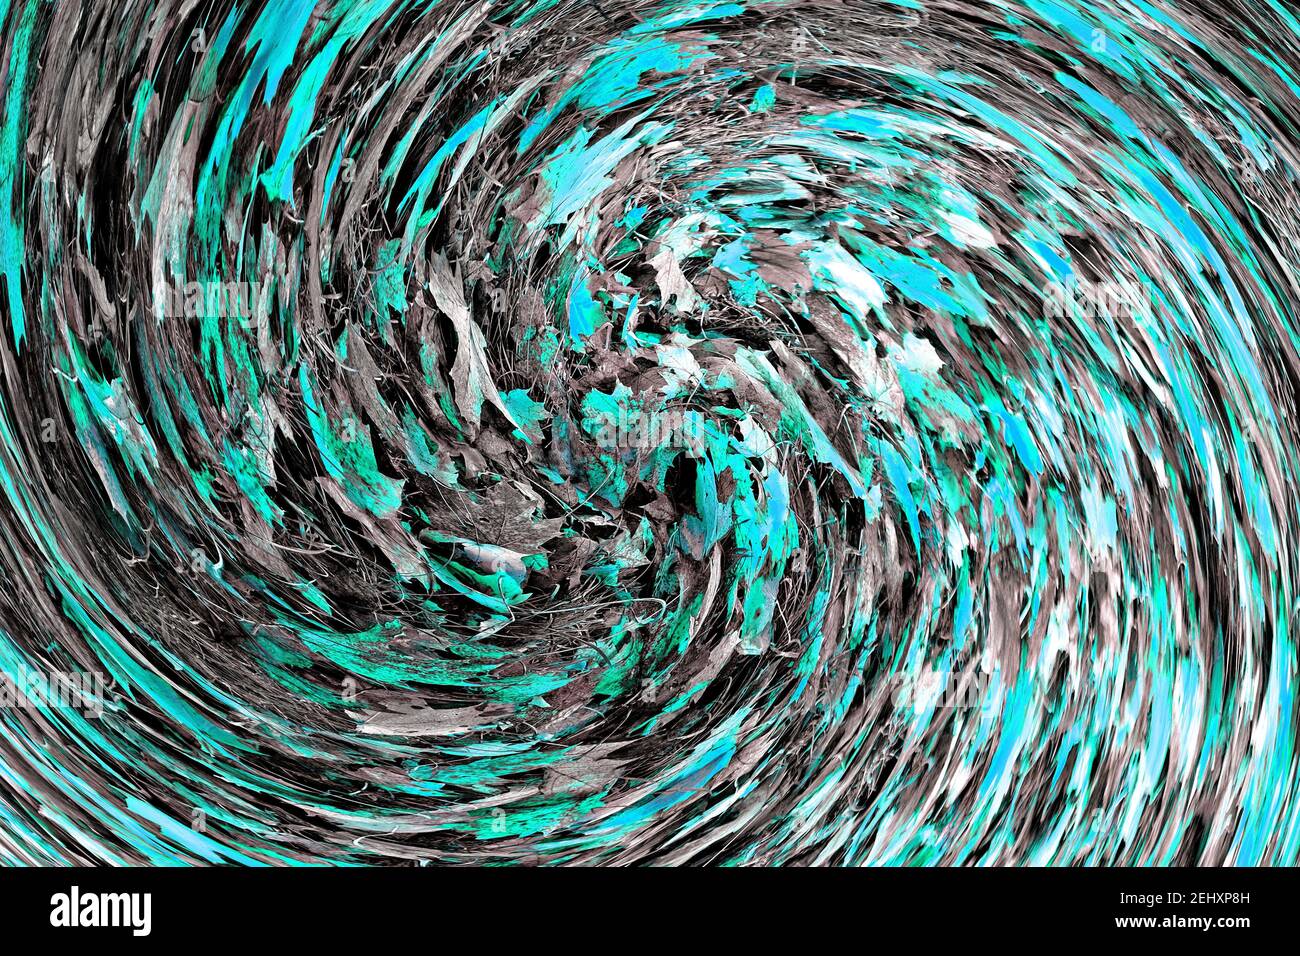 Abstract: Swirl or spiral of turquoise tinted Autumn leaves lying on grey grasses Stock Photo